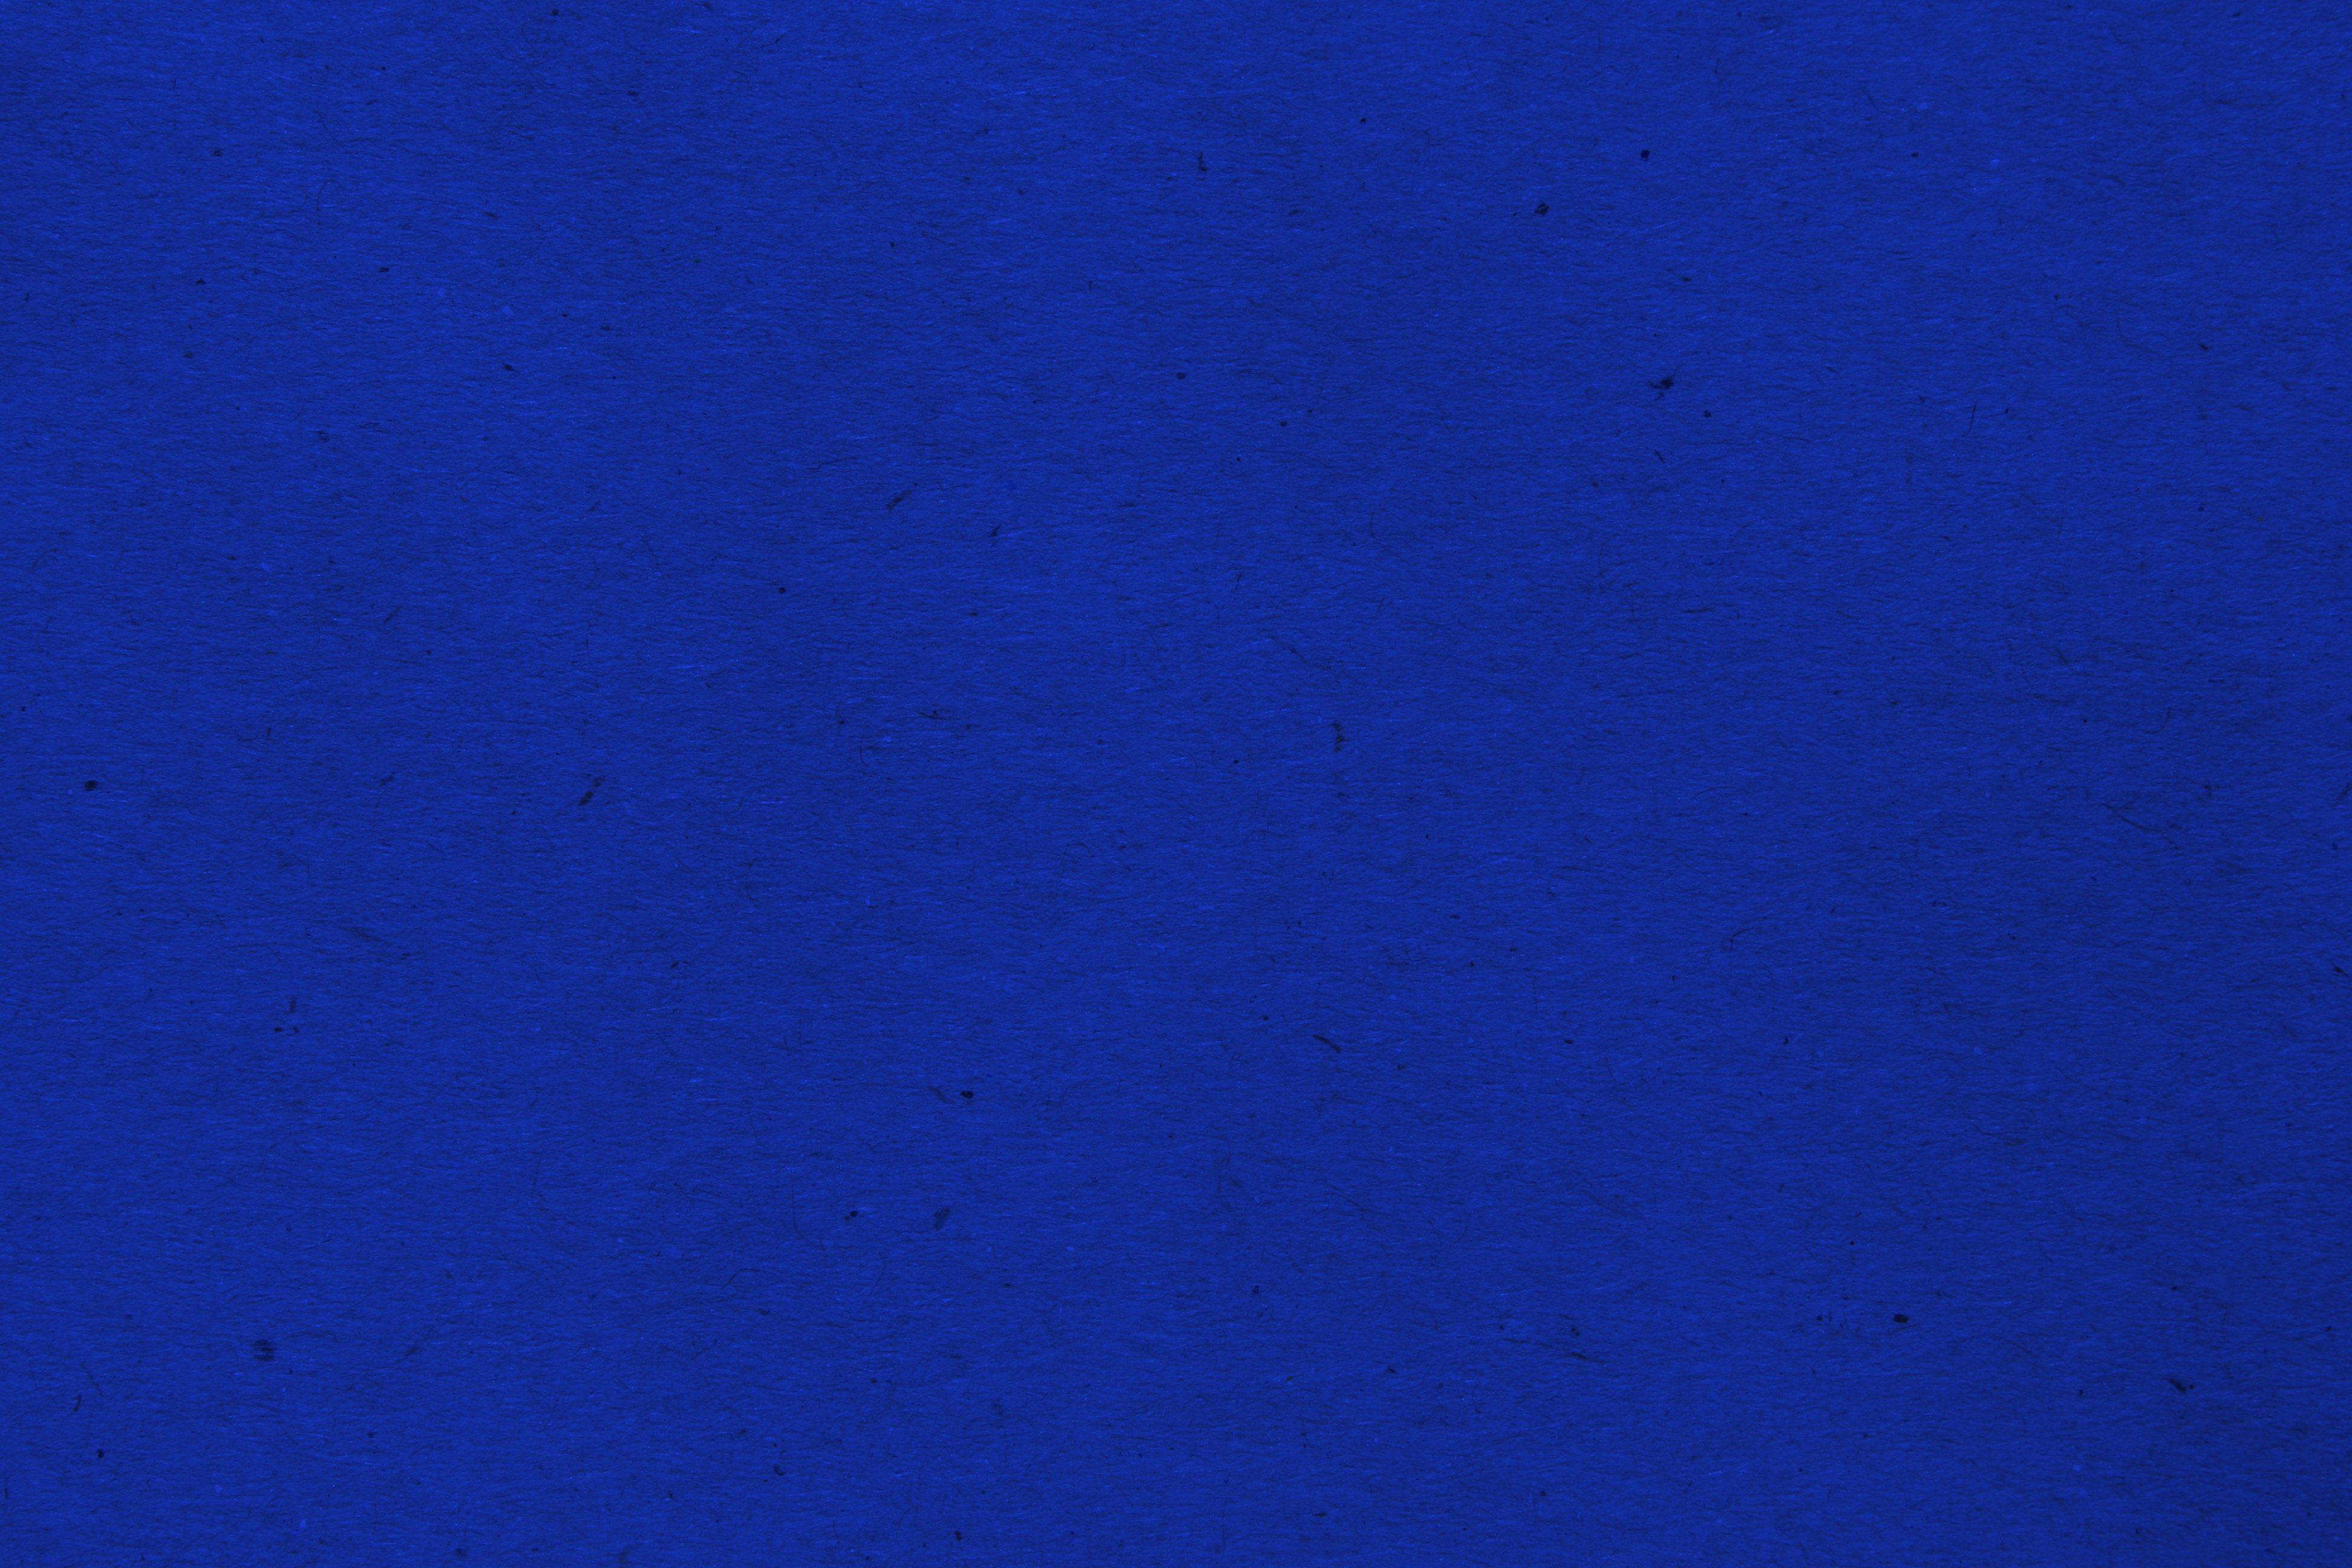 Free high resolution close up photo of a piece of deep blue or royal blue c...